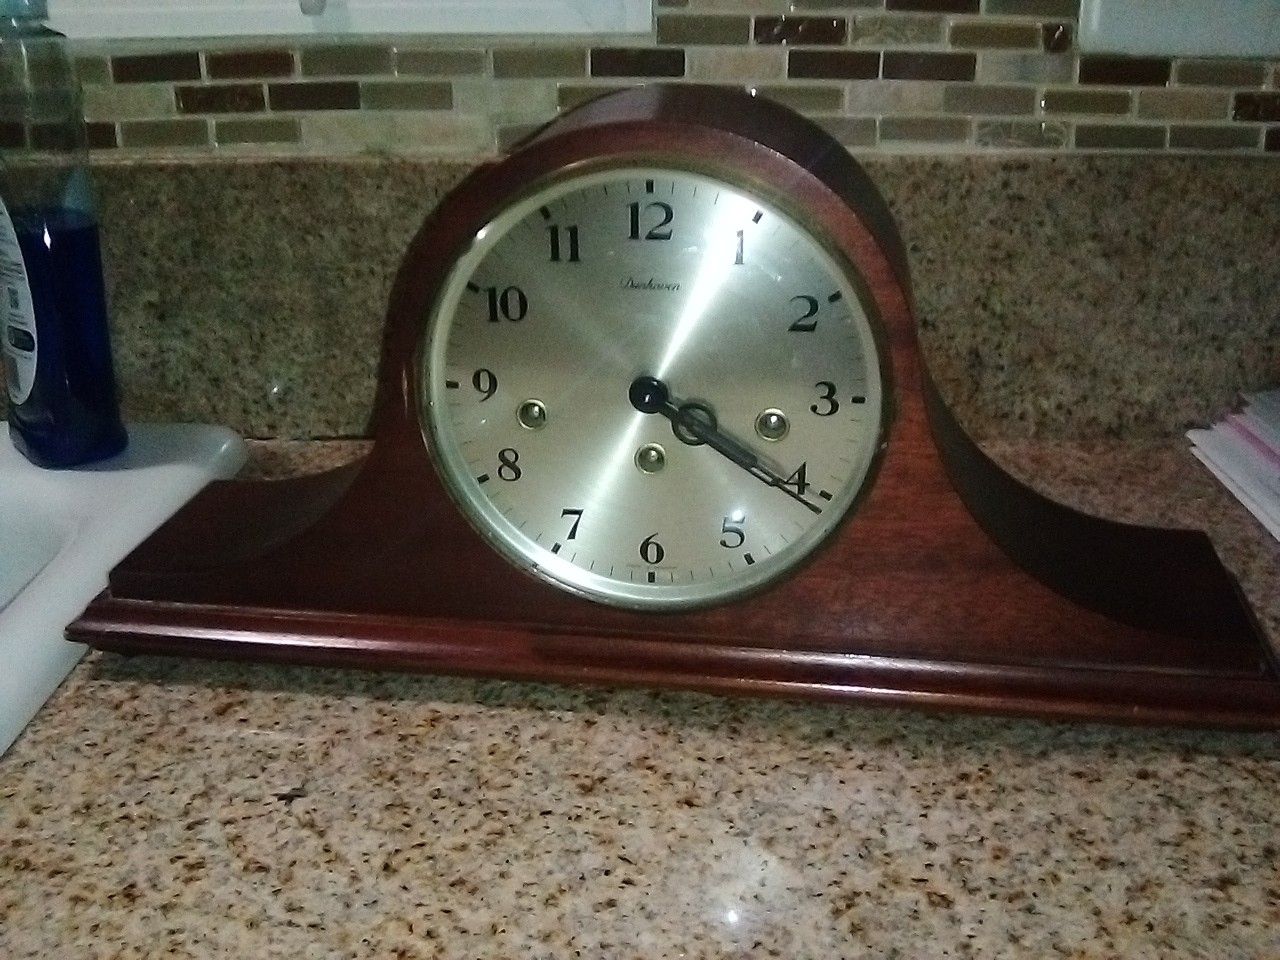 Dunhaven Mattel Clock made in Germany